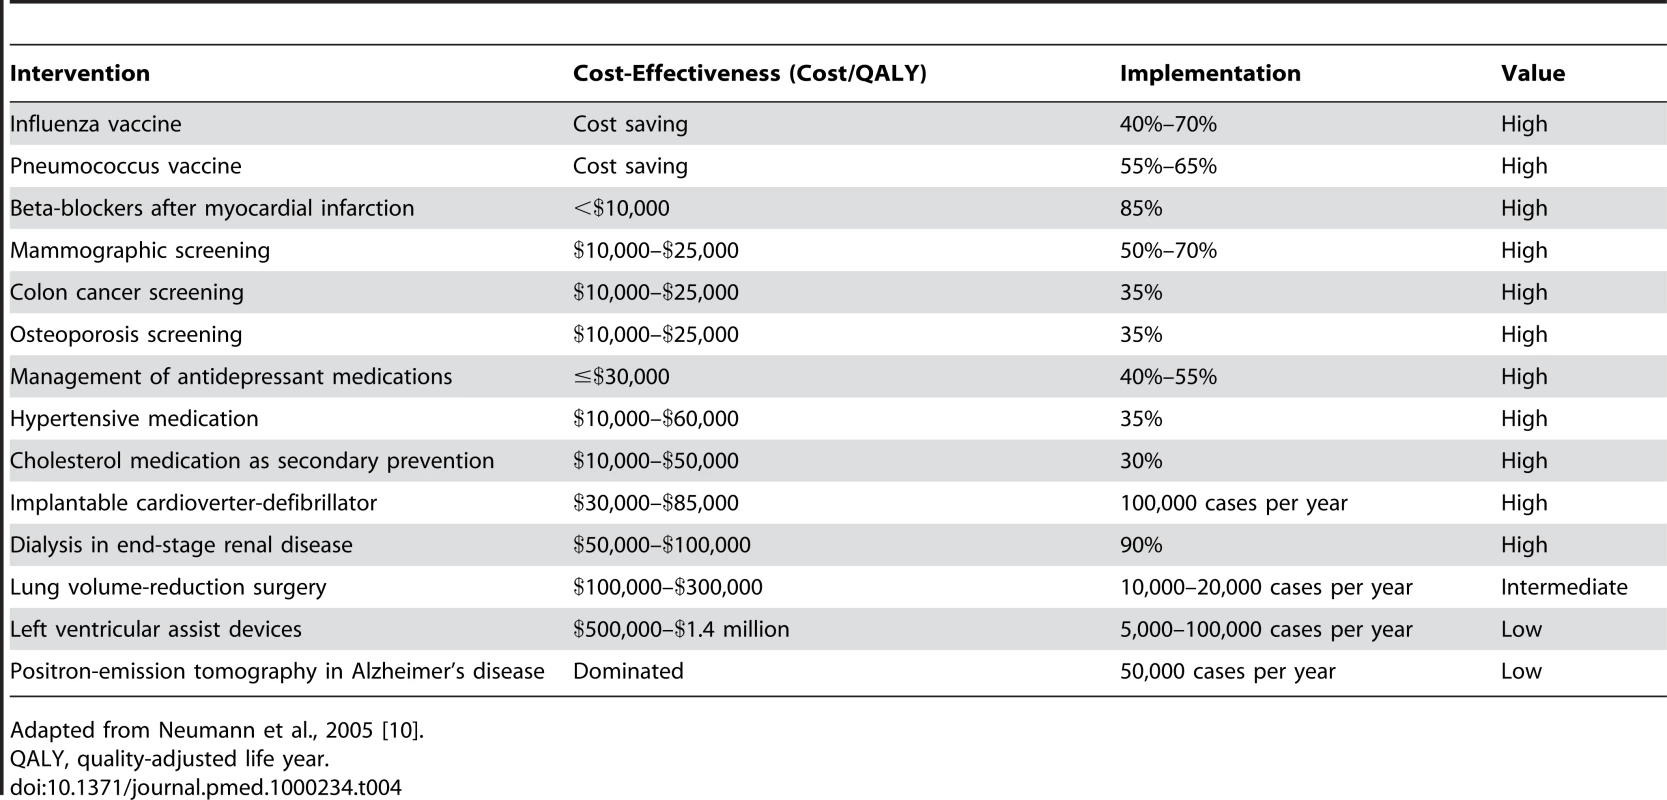 Cost-effectiveness and use of selected interventions in the Medicare population.